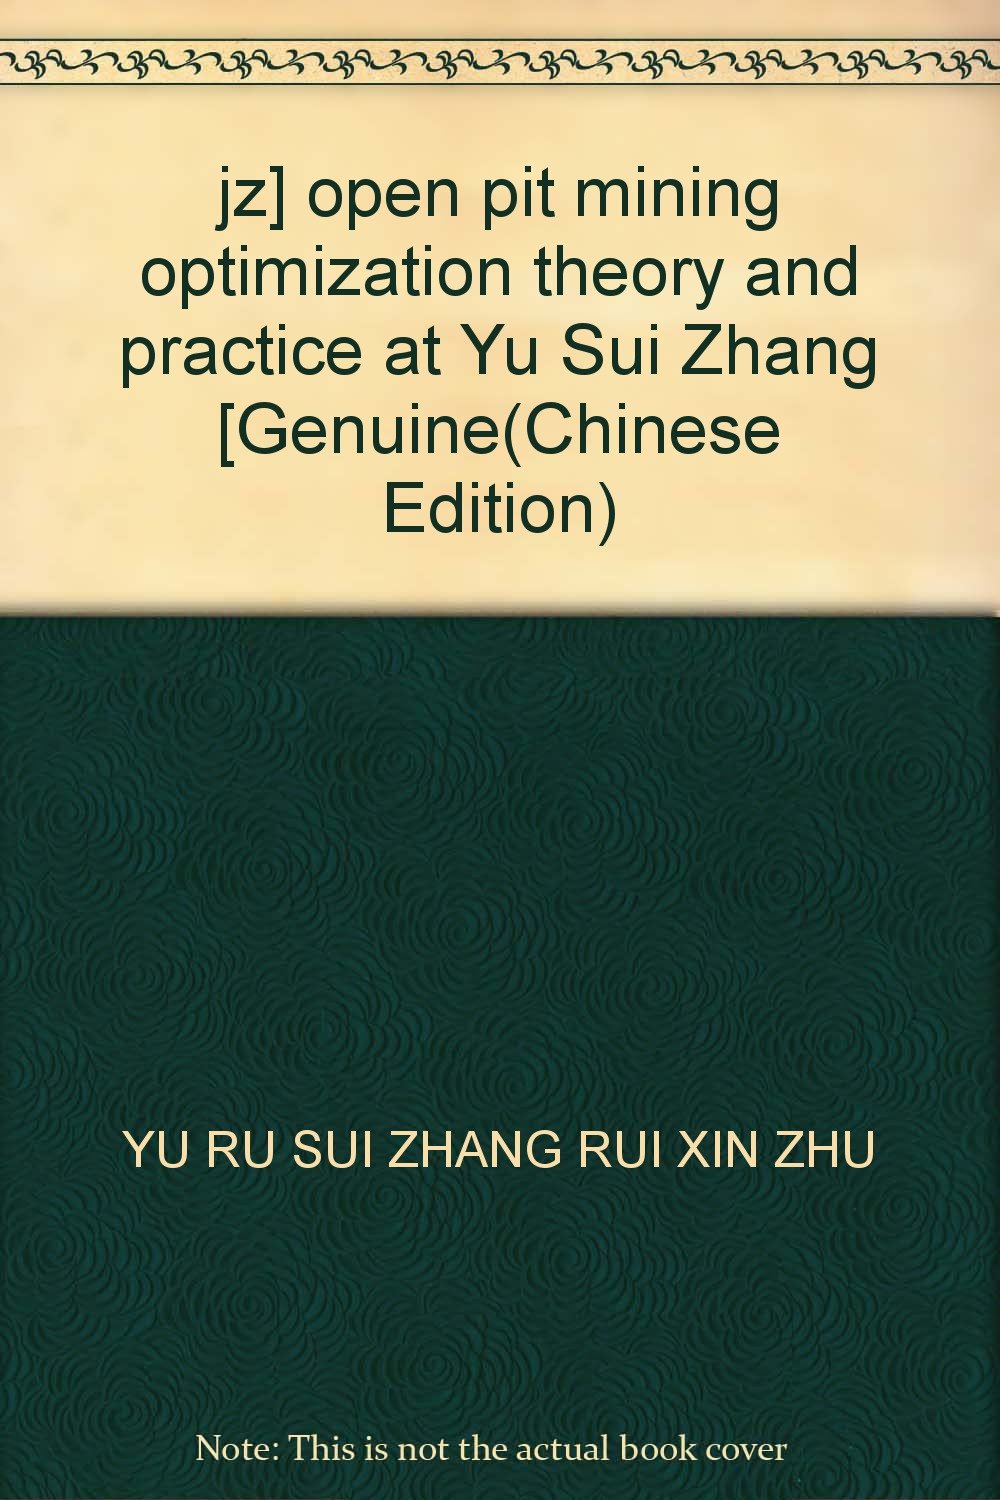 Yu Sui Zhang jz] open pit mining optimization theory and practice at Yu Sui Zhang [Genuine(Chinese Edition) 